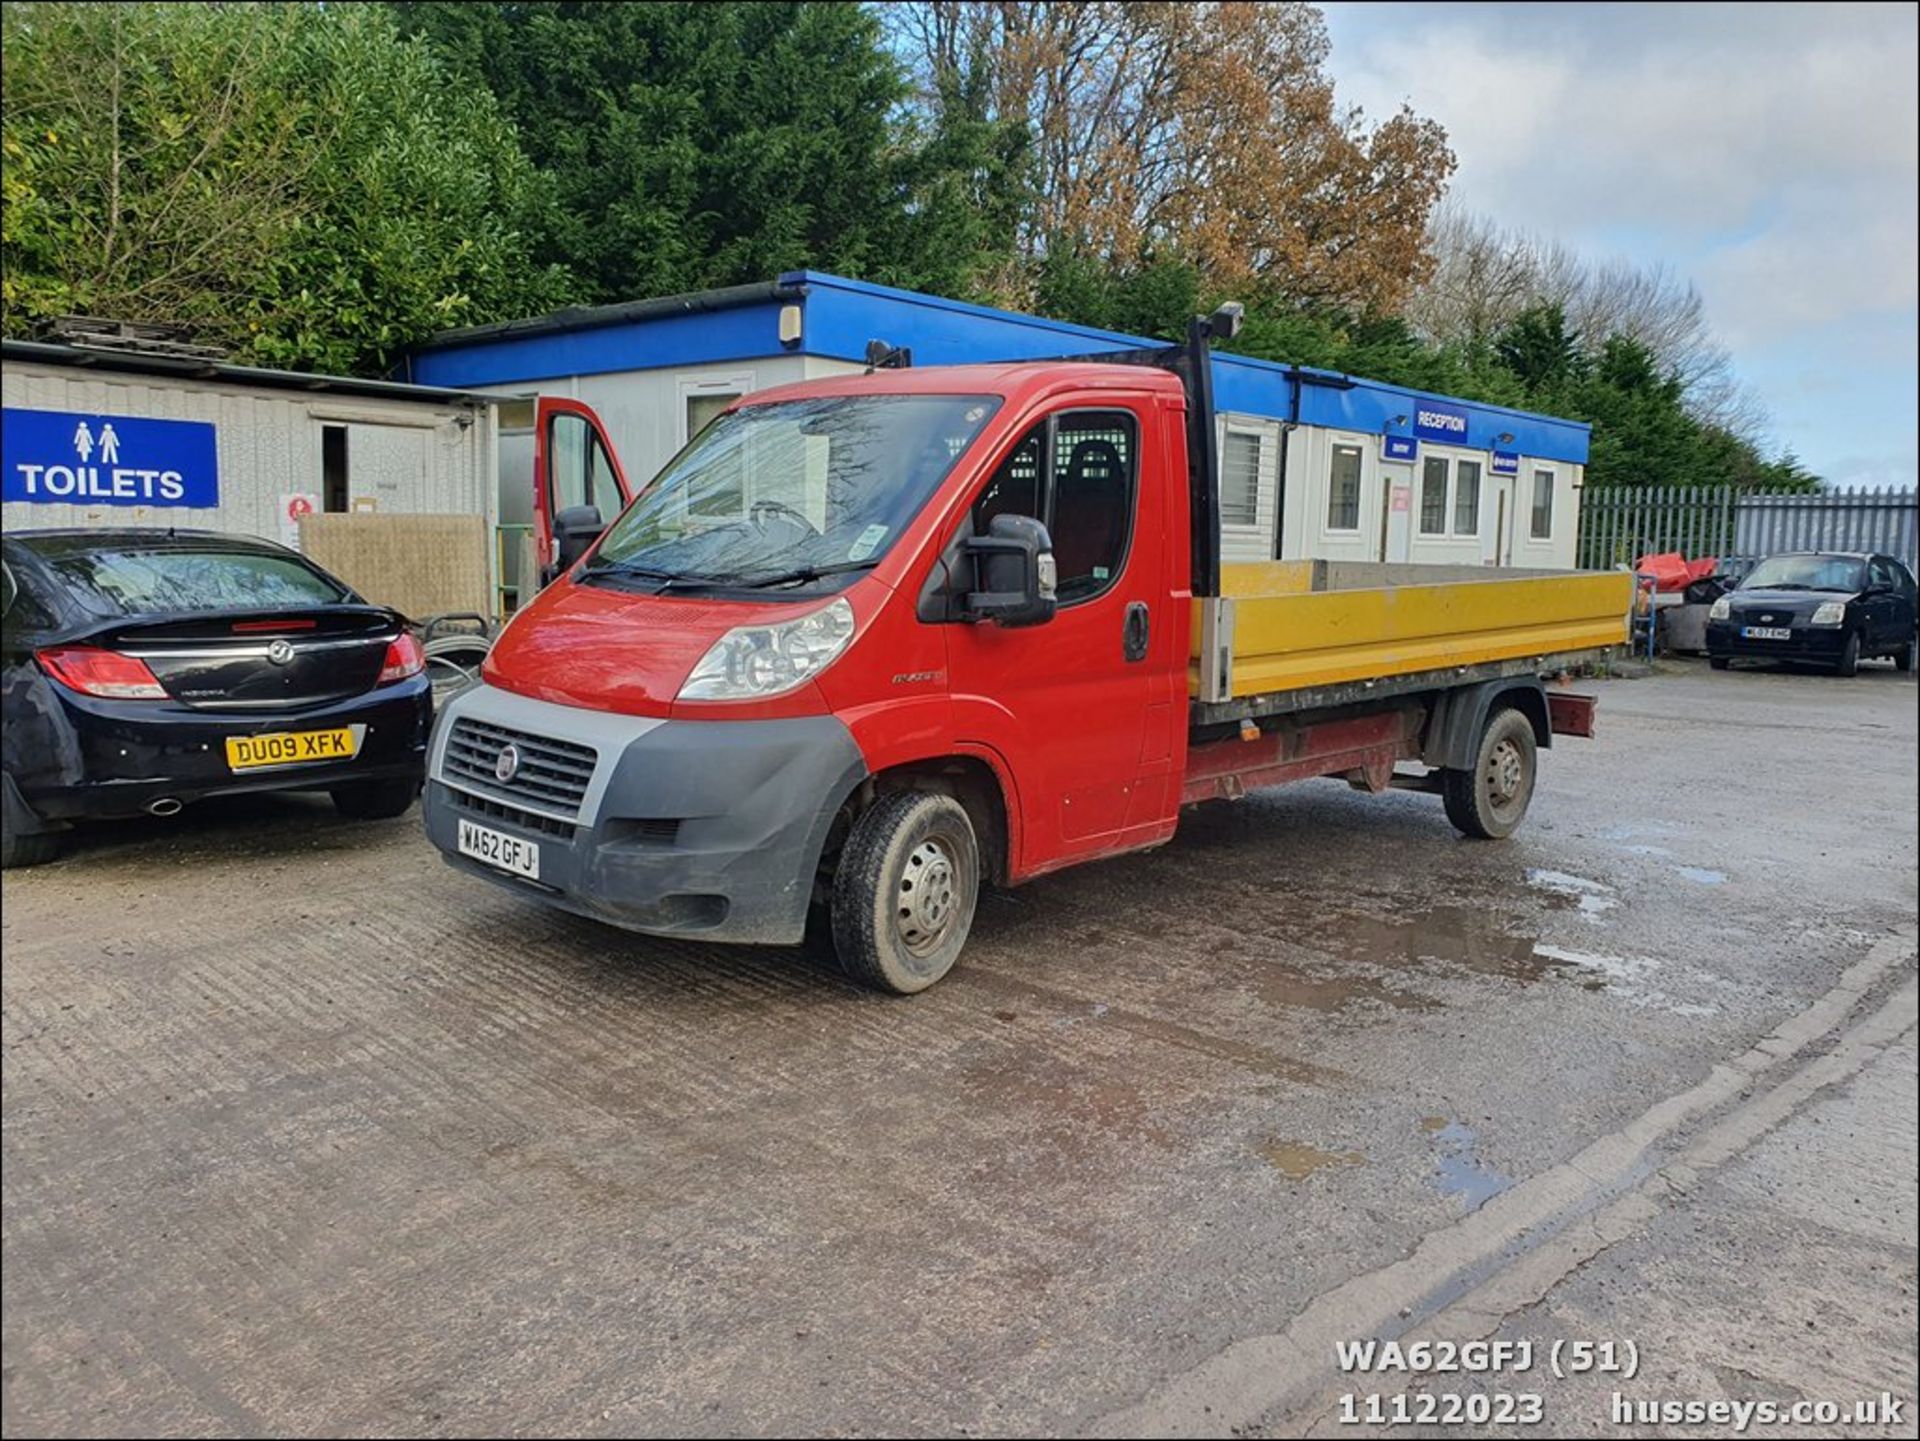 12/62 FIAT DUCATO 35 MULTIJET - 2287cc 2.dr Flat Bed (Red) - Image 52 of 52